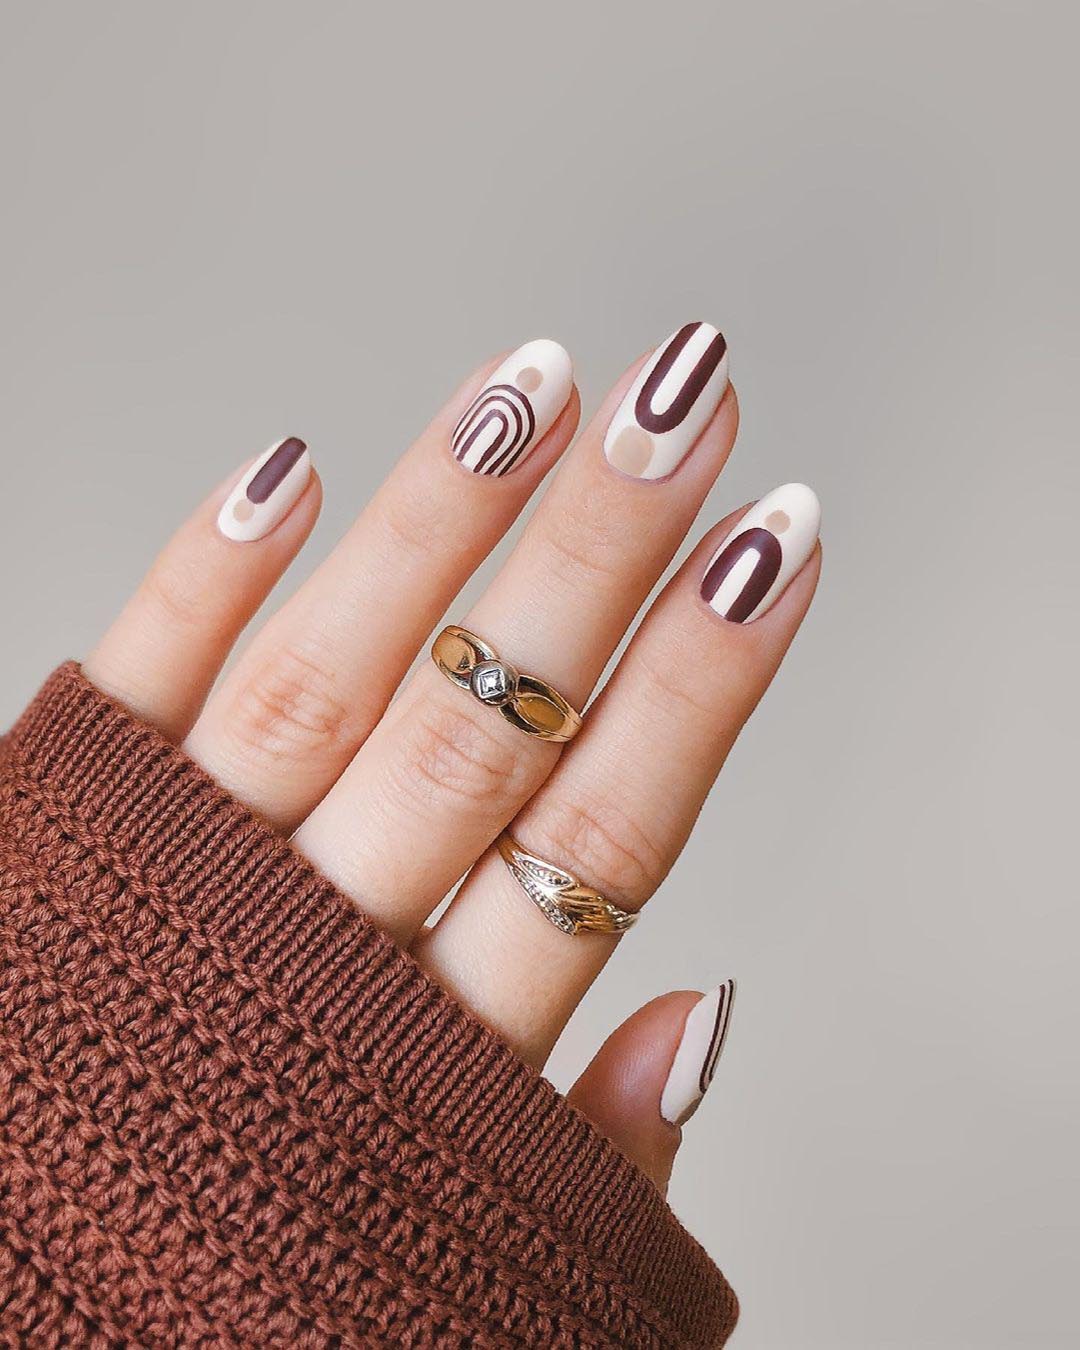 Nail set styled with mid-century-modern arches.